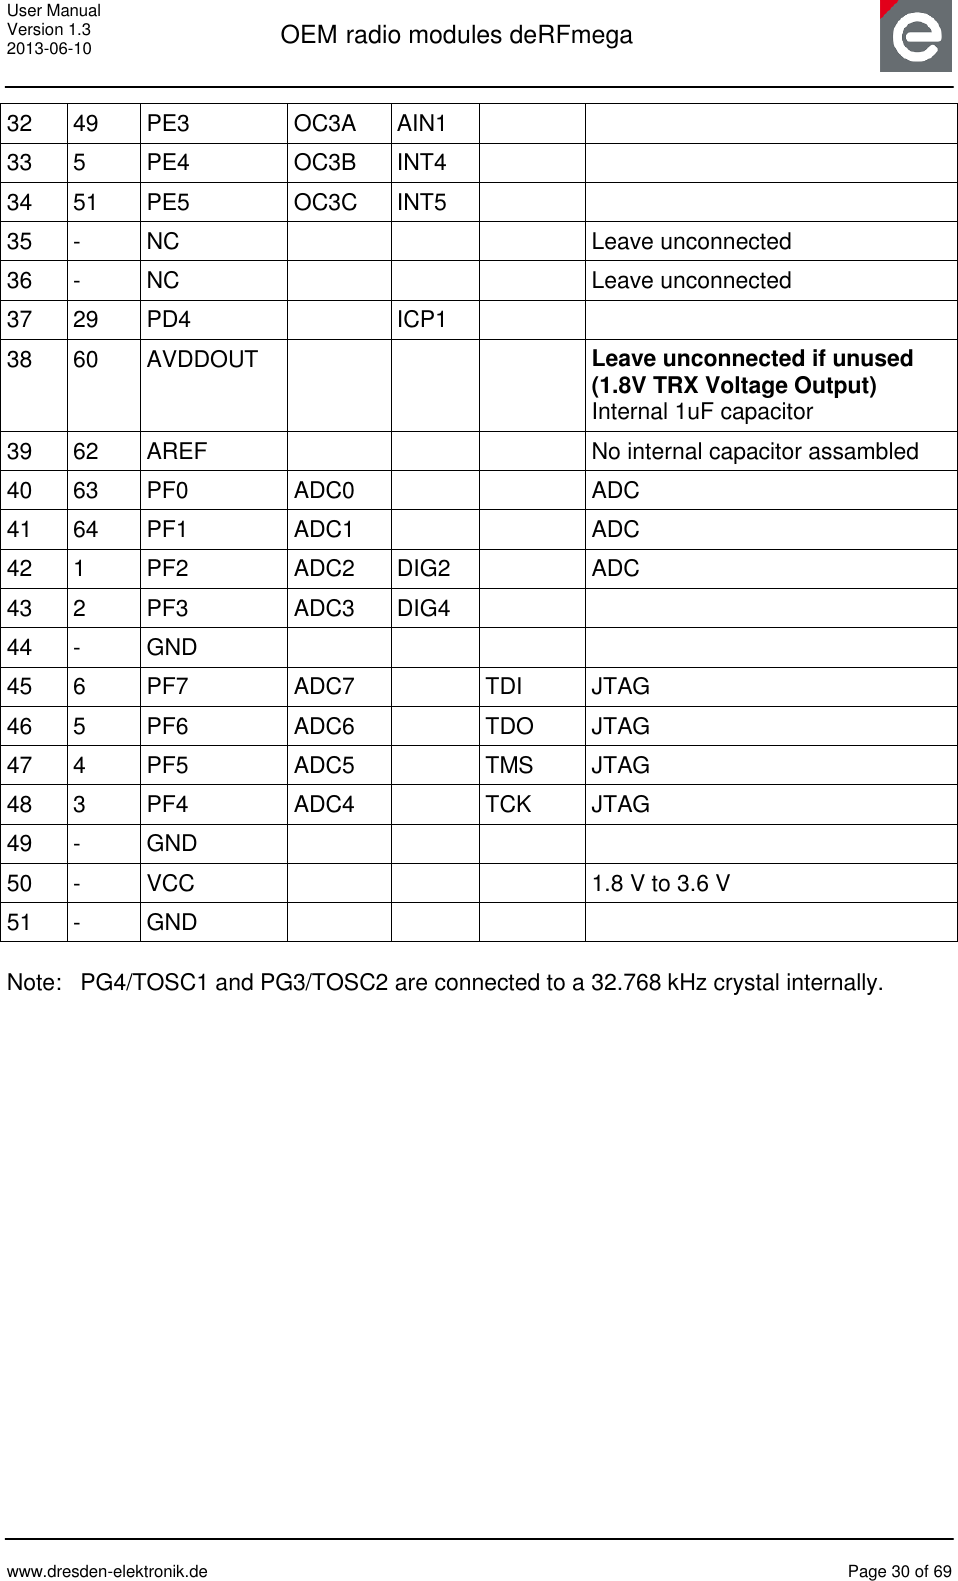 User Manual Version 1.3 2013-06-10  OEM radio modules deRFmega      www.dresden-elektronik.de  Page 30 of 69  32 49 PE3 OC3A AIN1   33 5 PE4 OC3B INT4   34 51 PE5 OC3C INT5   35 - NC    Leave unconnected 36 - NC    Leave unconnected 37 29 PD4  ICP1   38 60 AVDDOUT    Leave unconnected if unused (1.8V TRX Voltage Output) Internal 1uF capacitor 39 62 AREF    No internal capacitor assambled 40 63 PF0 ADC0   ADC 41 64 PF1 ADC1   ADC 42 1 PF2 ADC2 DIG2  ADC 43 2 PF3 ADC3 DIG4   44 - GND     45 6 PF7 ADC7  TDI JTAG 46 5 PF6 ADC6  TDO JTAG 47 4 PF5 ADC5  TMS JTAG 48 3 PF4 ADC4  TCK JTAG 49 - GND     50 - VCC    1.8 V to 3.6 V 51 - GND      Note:   PG4/TOSC1 and PG3/TOSC2 are connected to a 32.768 kHz crystal internally.  